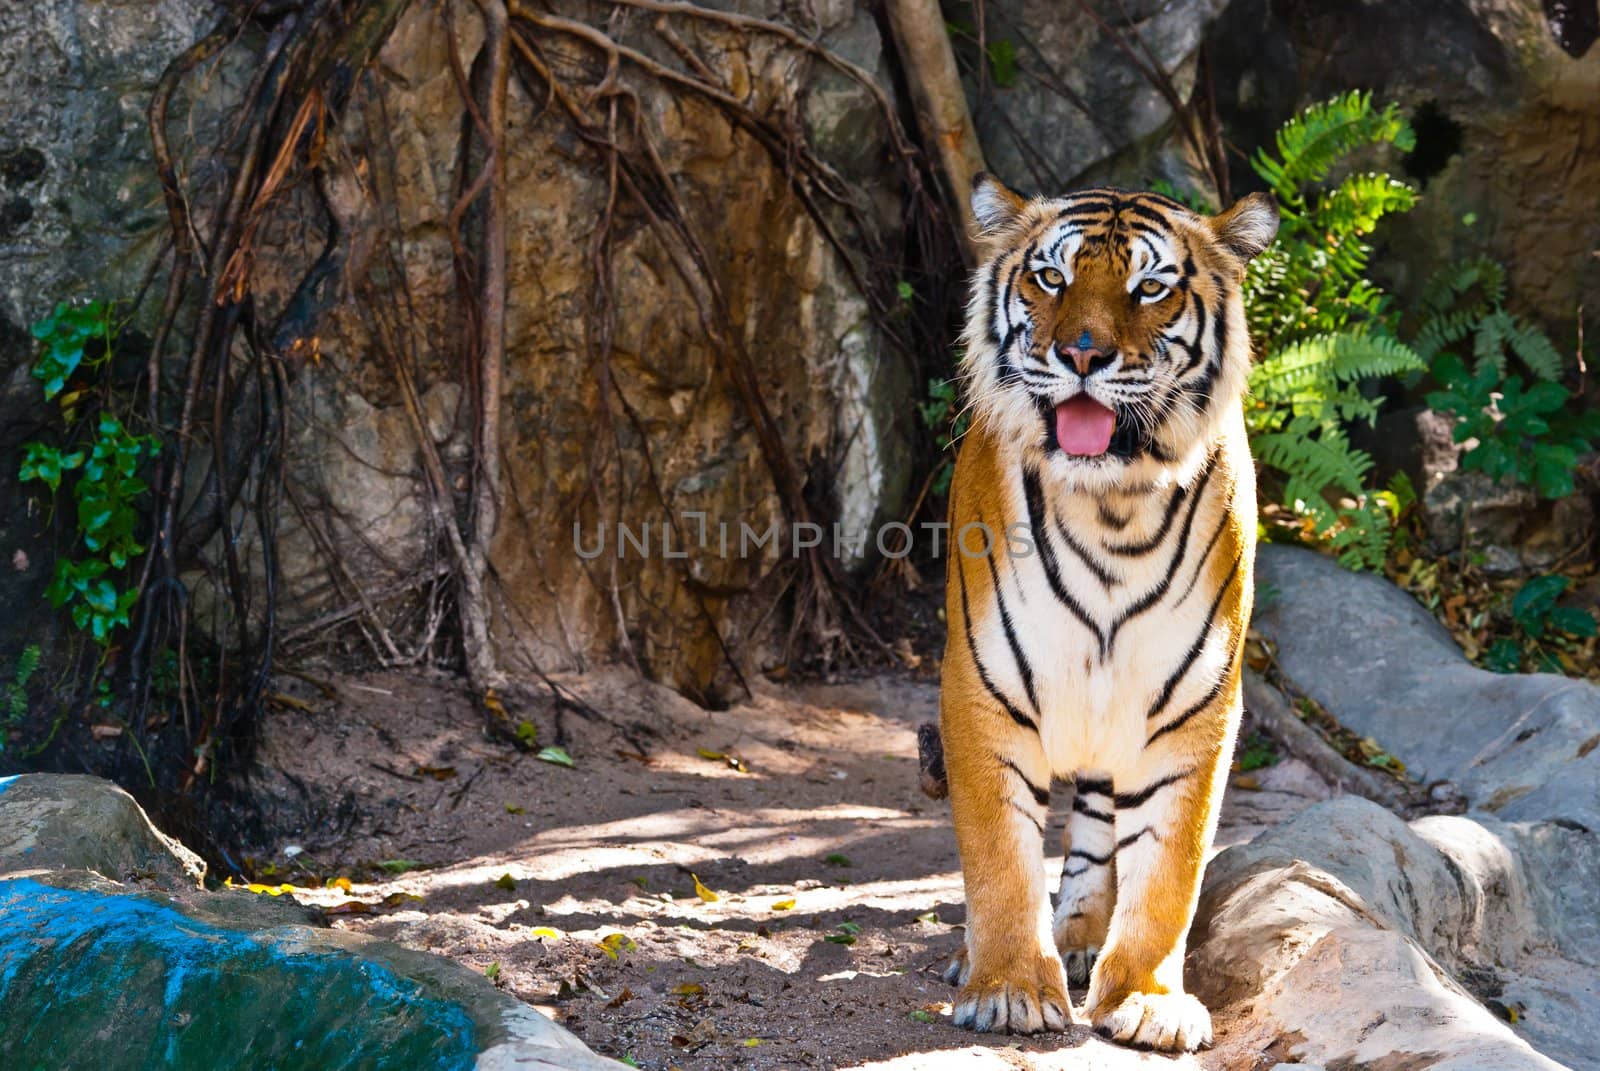 Female wild tiger from Thailand by sasilsolutions